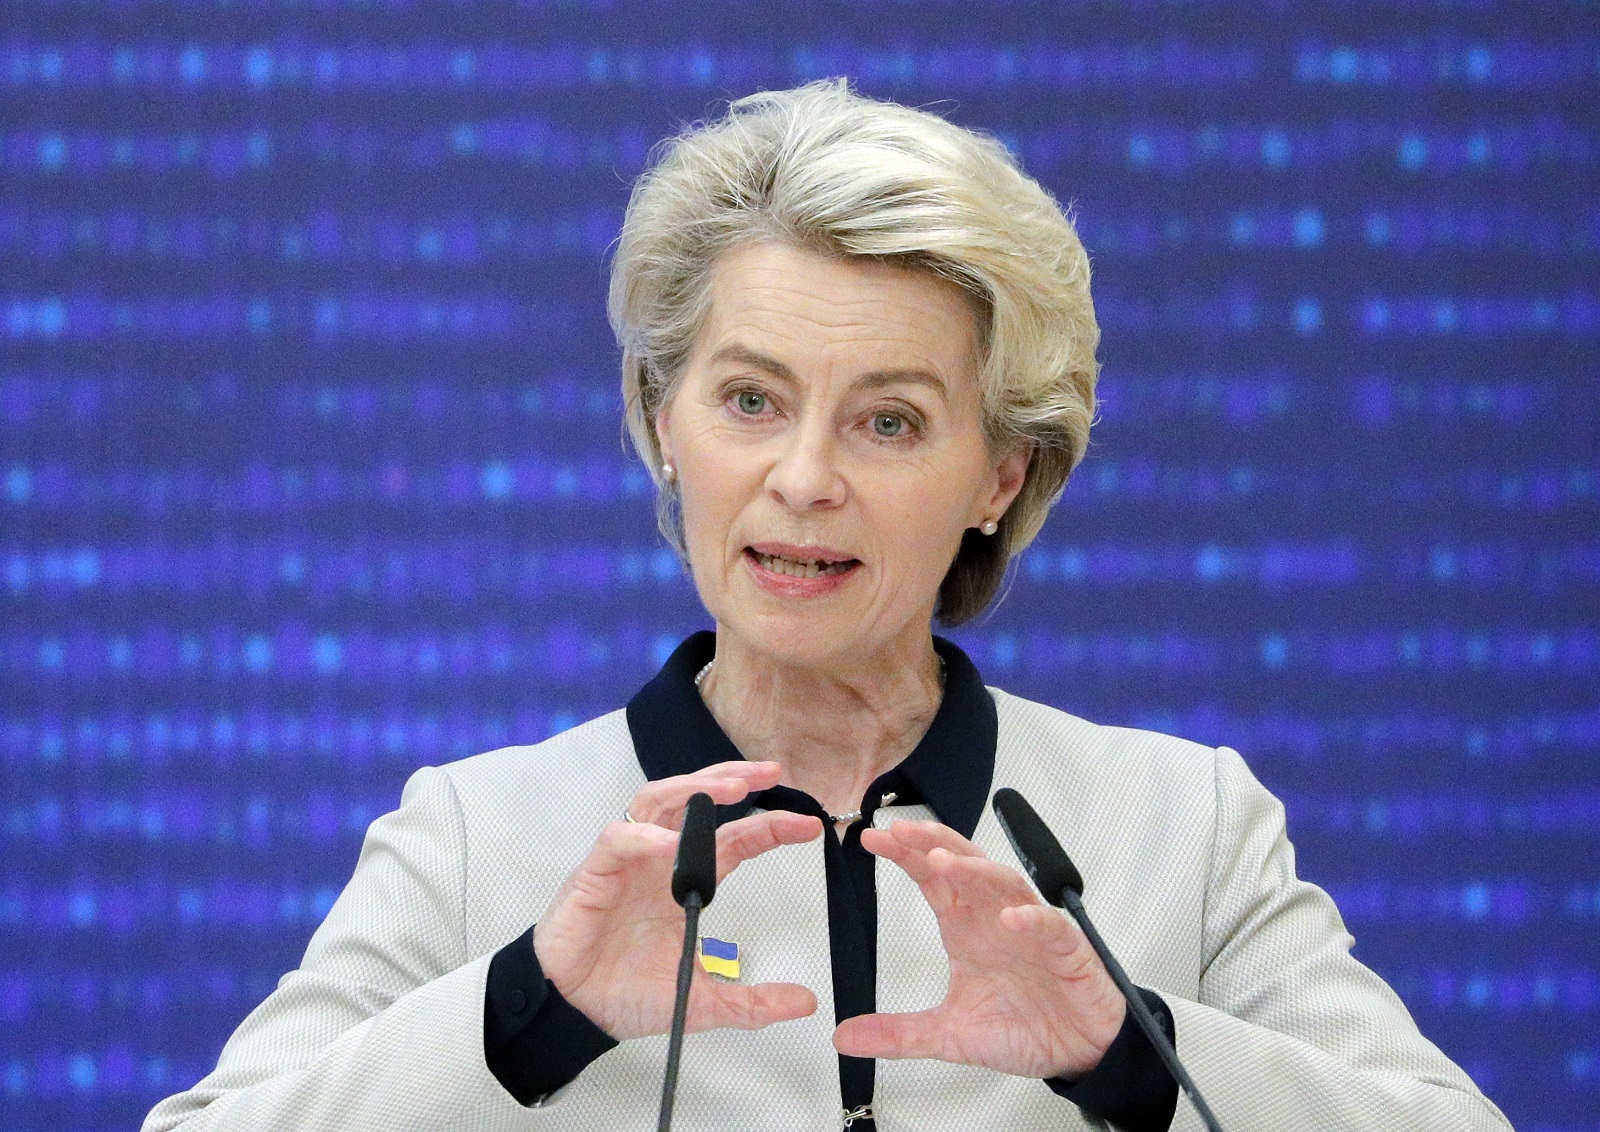 epa10445682 European Commission President Ursula von der Leyen speaks at a meeting with media following the Ukraine - EU summit in Kyiv, Ukraine, 03 February 2023. Ursula von der Leyen and and Charles Michel accompanied by 15 Commissioners, visit Kyiv to meet with Ukrainian top officials and take part in the EU-Ukraine summit, the first summit since the European Council granted Ukraine the status of EU candidate amid Russia's invasion. Ukraine applied for EU membership in February 2022 and was granted EU candidate status in June 2022.  EPA/SERGEY DOLZHENKO